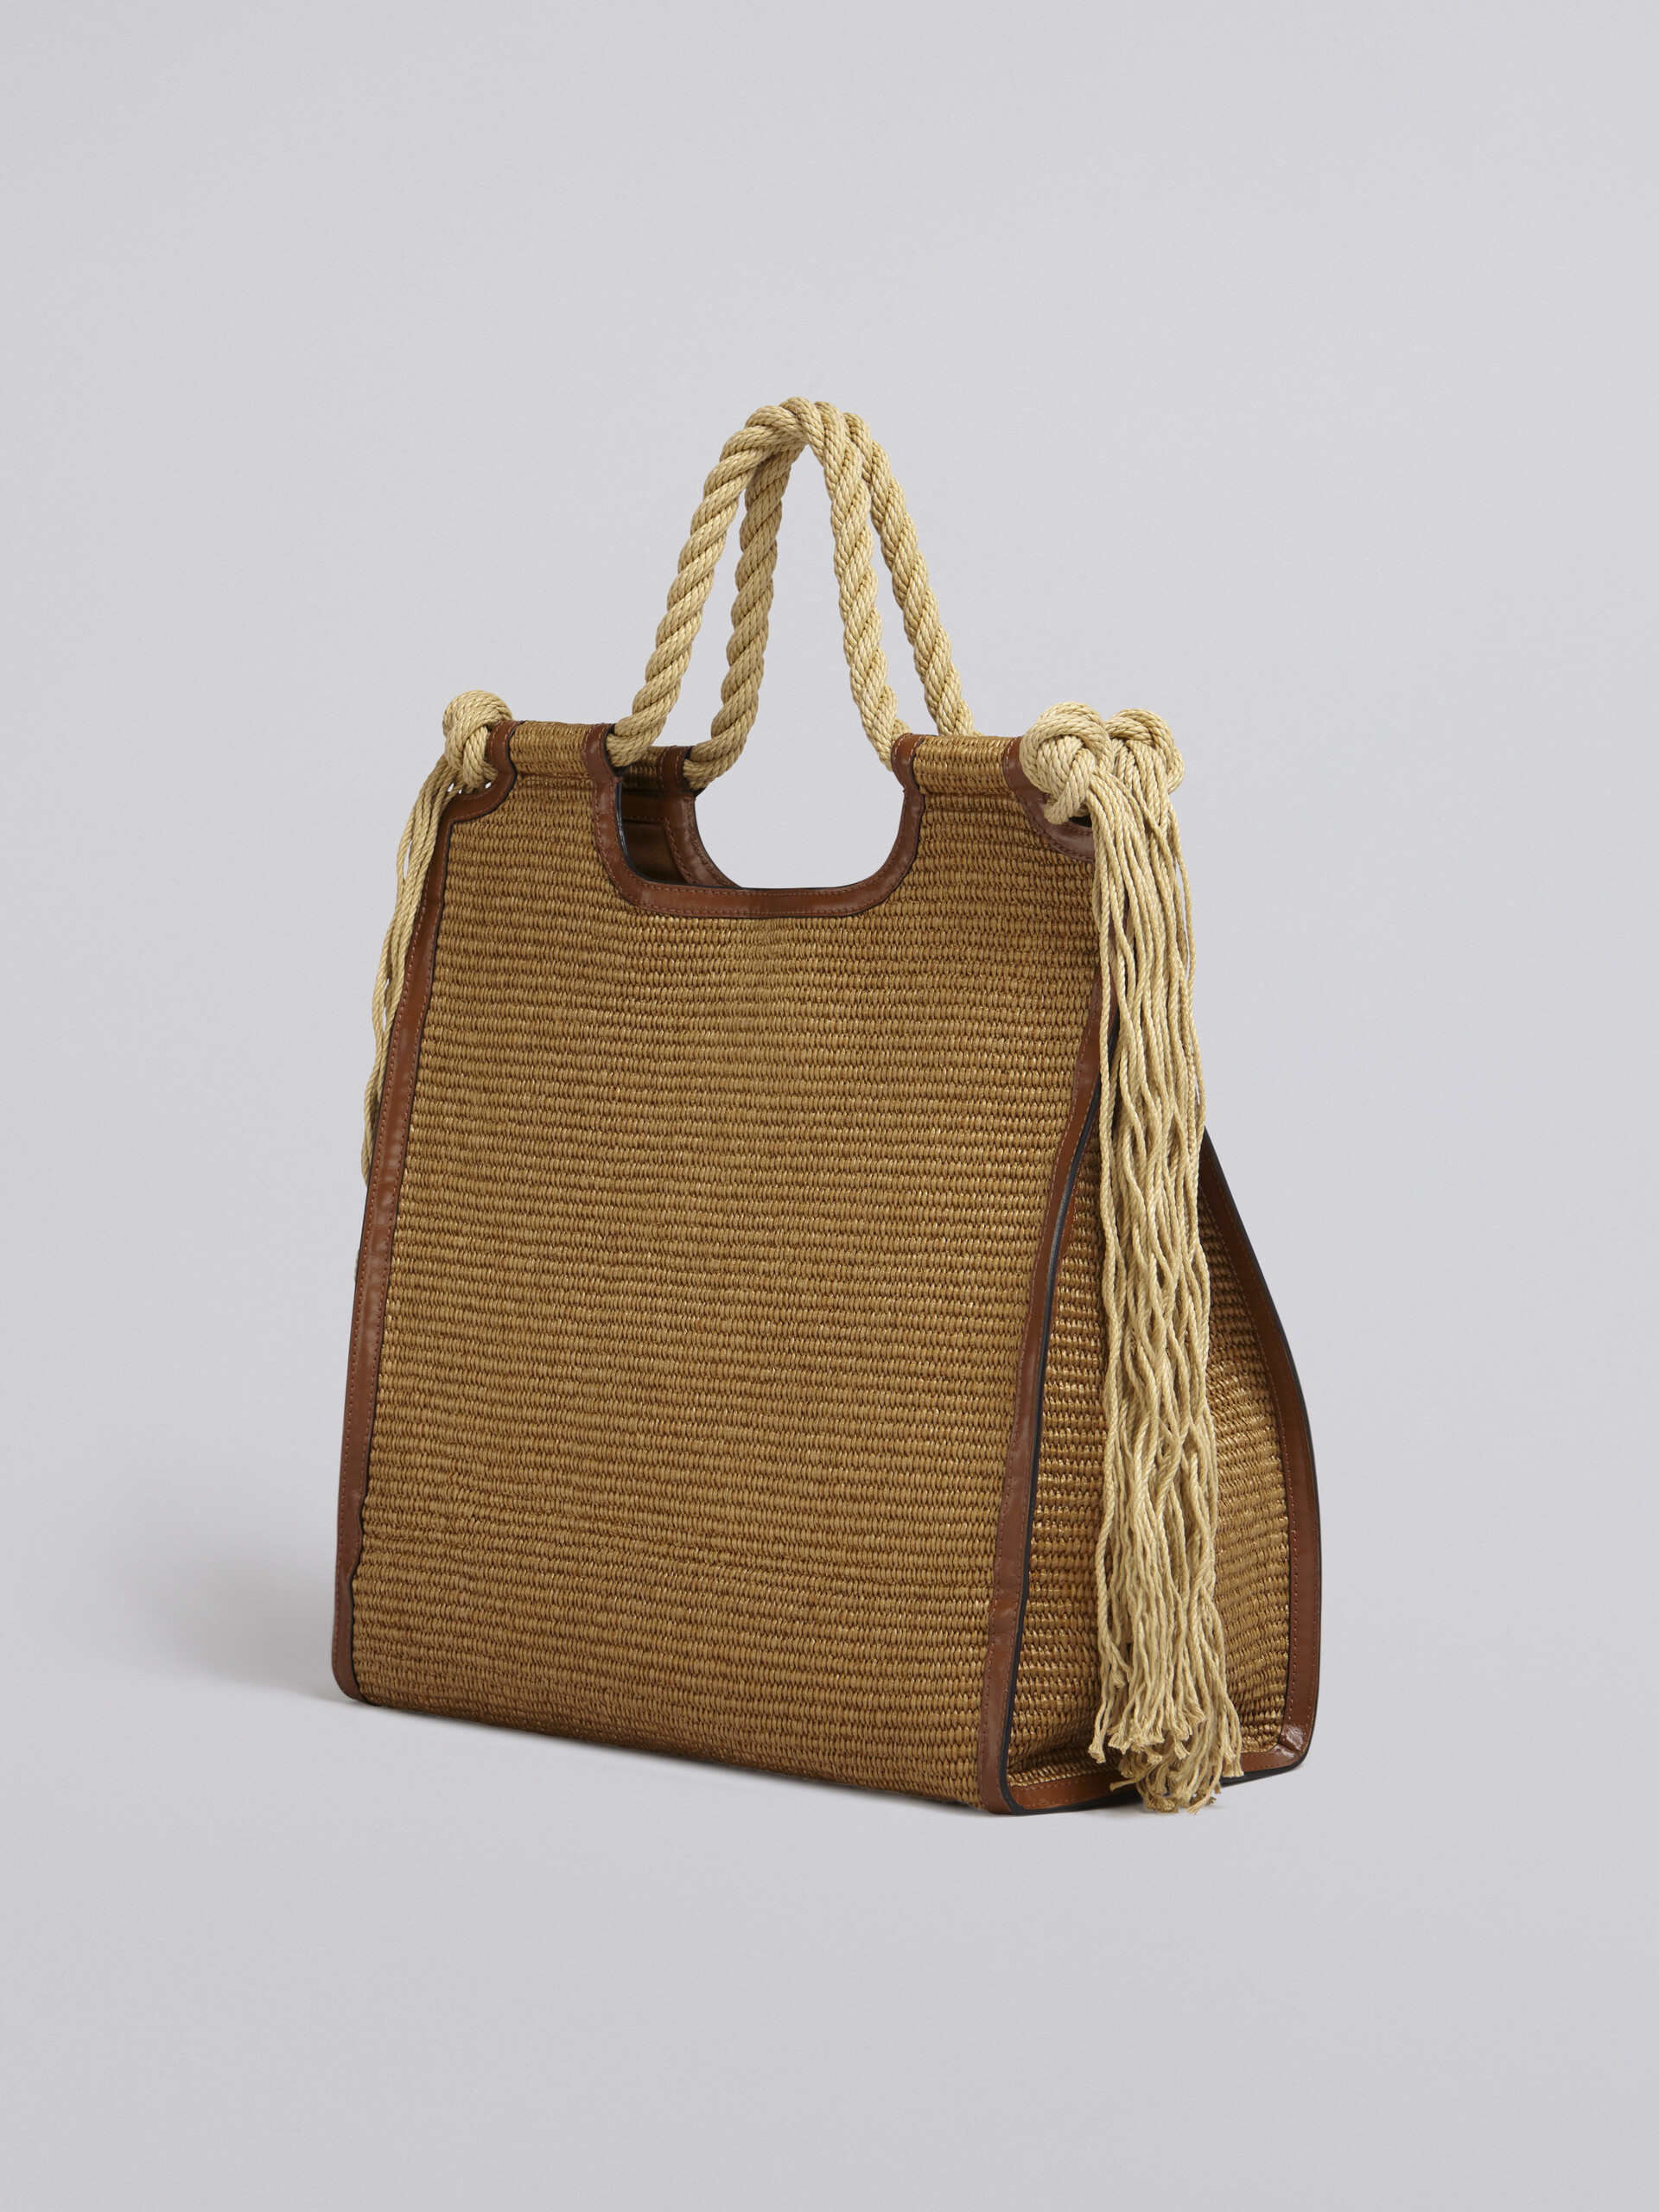 Marcel summer bag in brown leather and raffia with rope handles - Handbag - Image 3